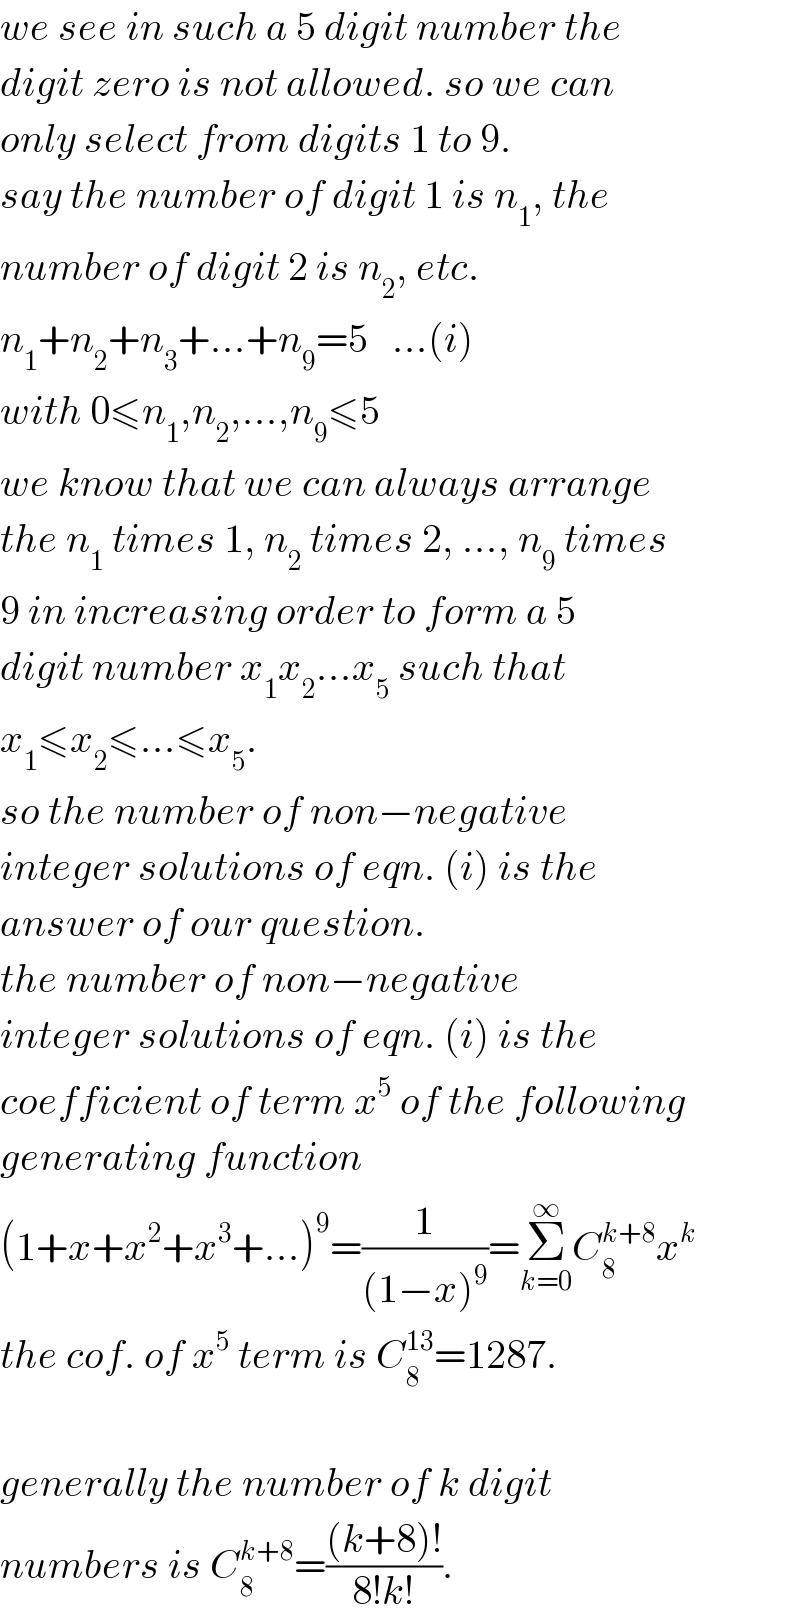 we see in such a 5 digit number the  digit zero is not allowed. so we can  only select from digits 1 to 9.  say the number of digit 1 is n_1 , the  number of digit 2 is n_2 , etc.  n_1 +n_2 +n_3 +...+n_9 =5   ...(i)  with 0≤n_1 ,n_2 ,...,n_9 ≤5  we know that we can always arrange  the n_1  times 1, n_2  times 2, ..., n_9  times  9 in increasing order to form a 5  digit number x_1 x_2 ...x_5  such that  x_1 ≤x_2 ≤...≤x_5 .  so the number of non−negative  integer solutions of eqn. (i) is the  answer of our question.  the number of non−negative   integer solutions of eqn. (i) is the  coefficient of term x^5  of the following  generating function  (1+x+x^2 +x^3 +...)^9 =(1/((1−x)^9 ))=Σ_(k=0) ^∞ C_8 ^(k+8) x^k   the cof. of x^5  term is C_8 ^(13) =1287.    generally the number of k digit  numbers is C_8 ^(k+8) =(((k+8)!)/(8!k!)).  